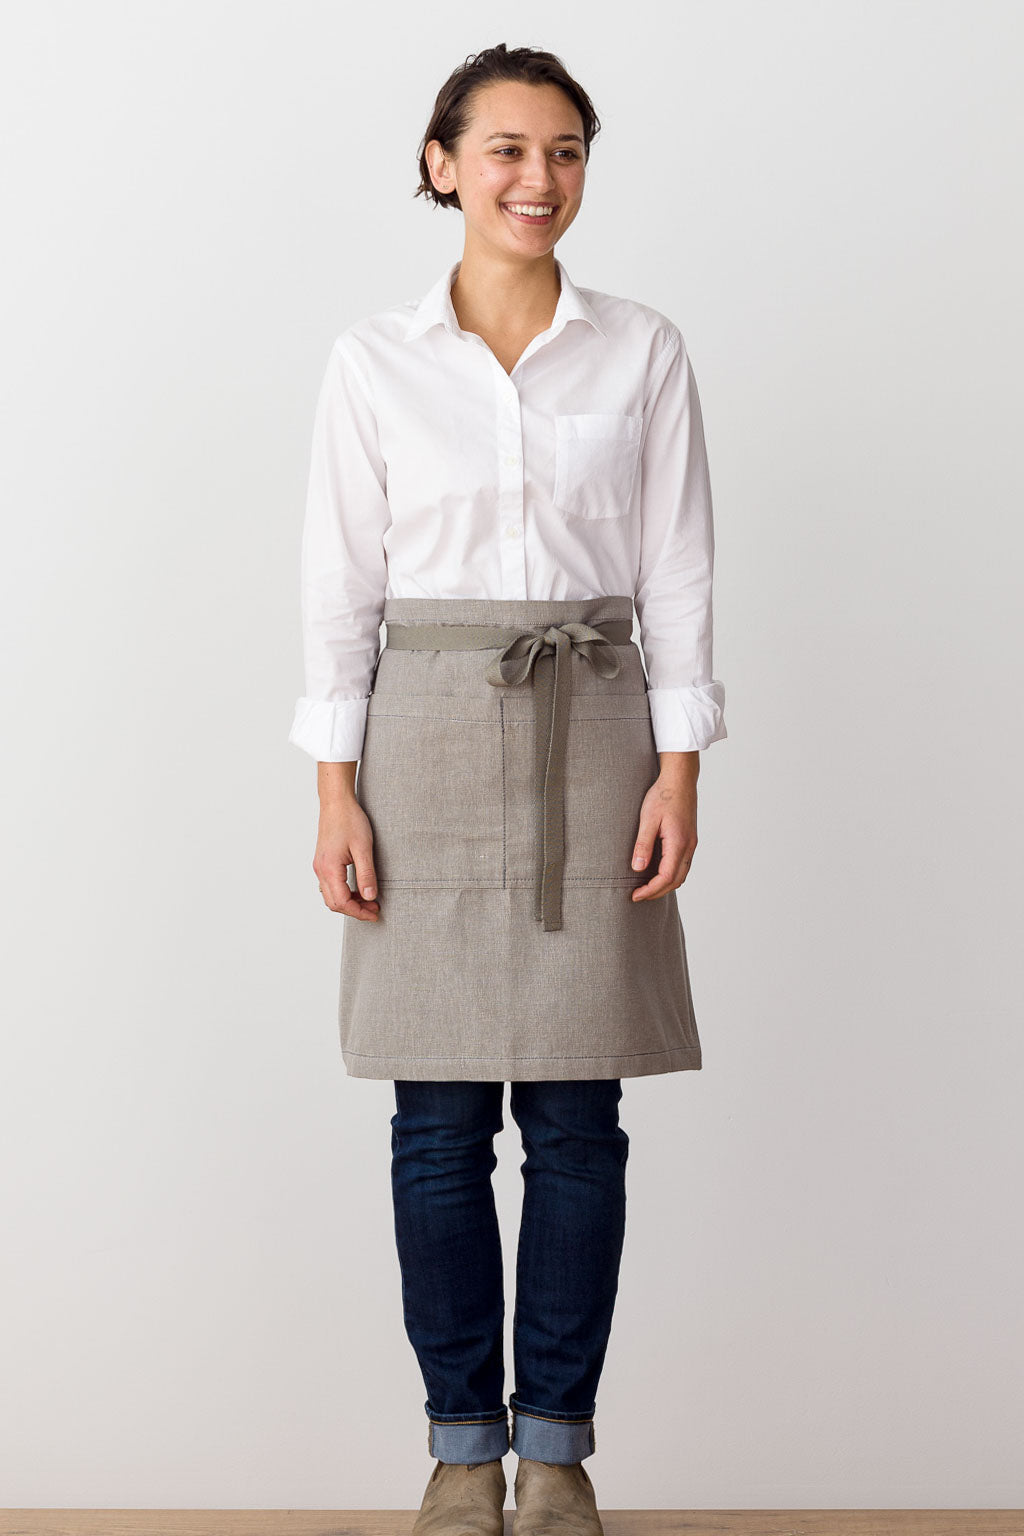 Bistro Middly Aprons